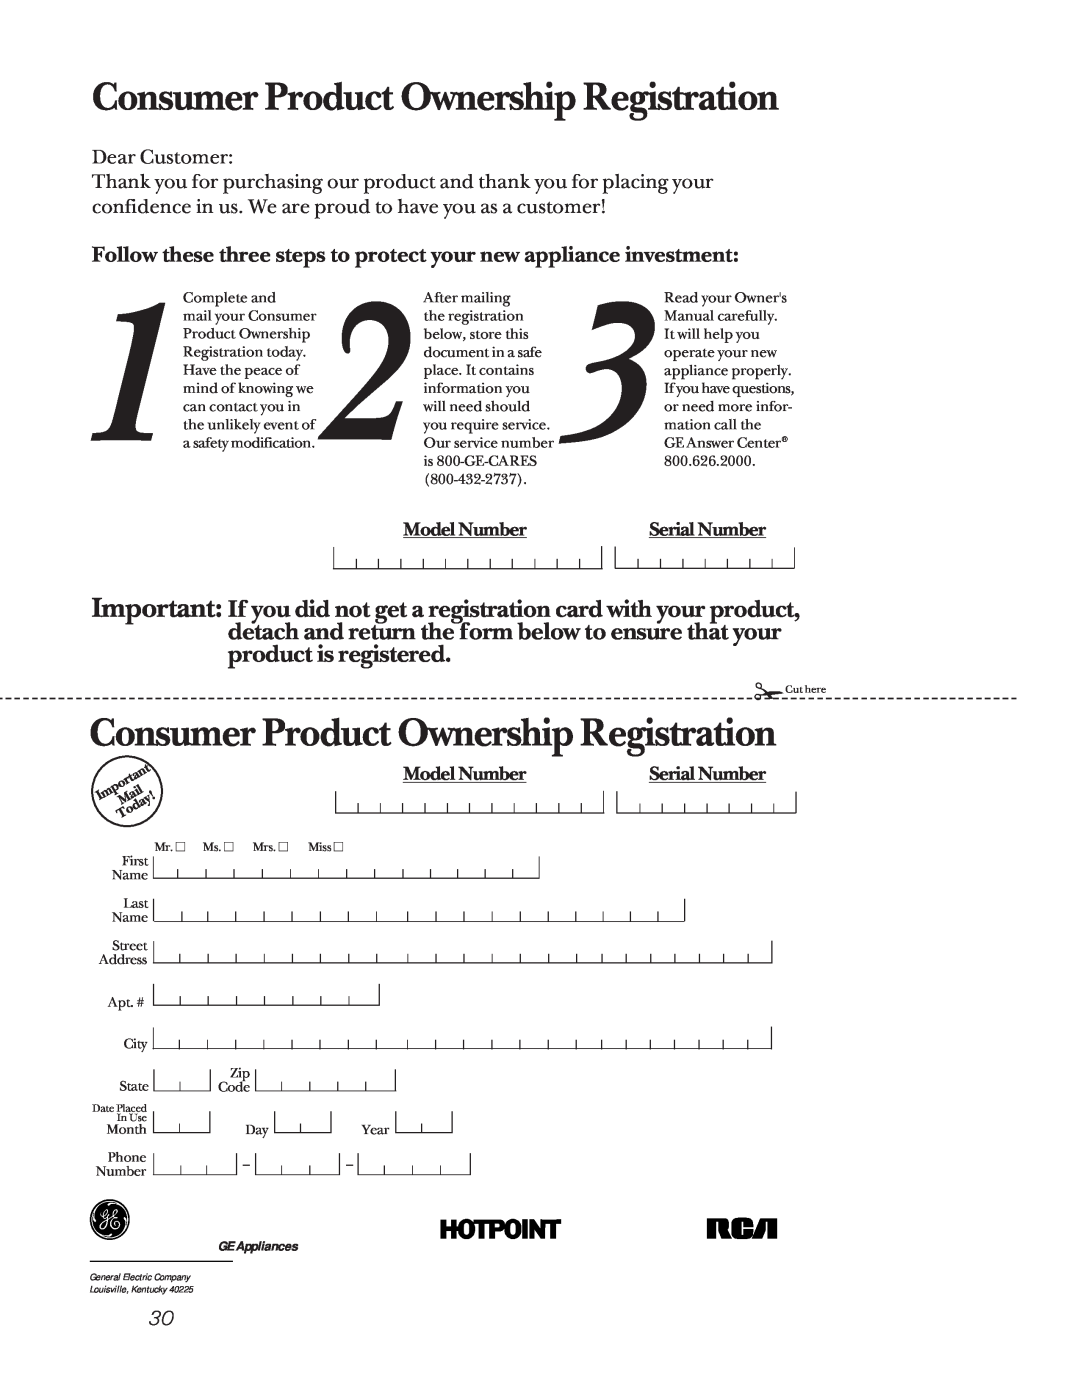 Hotpoint RB754, LEB327, LEB316, LEB356 Consumer Product Ownership Registration, Model Number, Serial Number, GE Appliances 